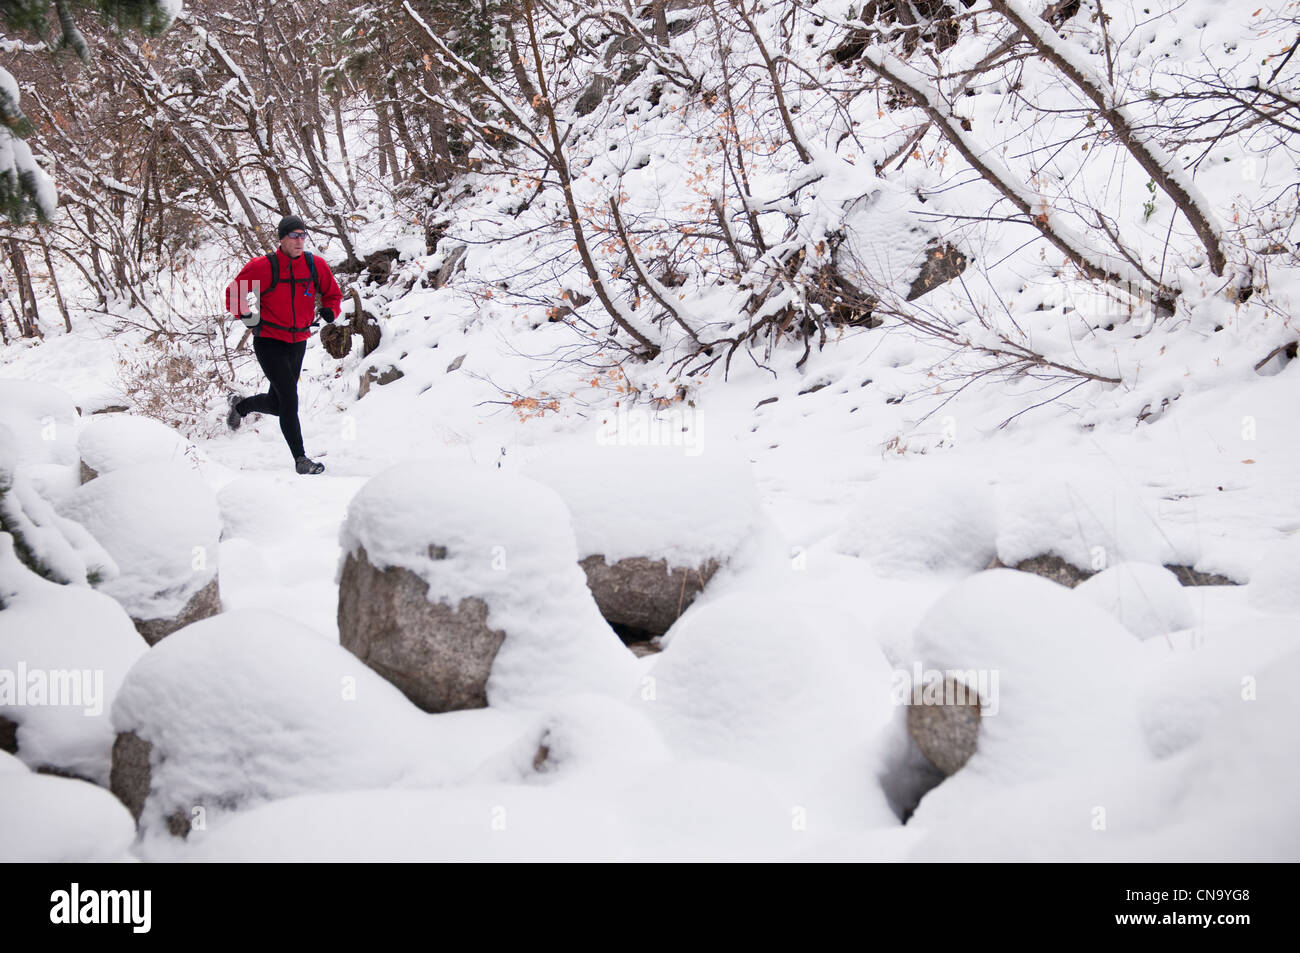 Man running in snowy landscape Banque D'Images